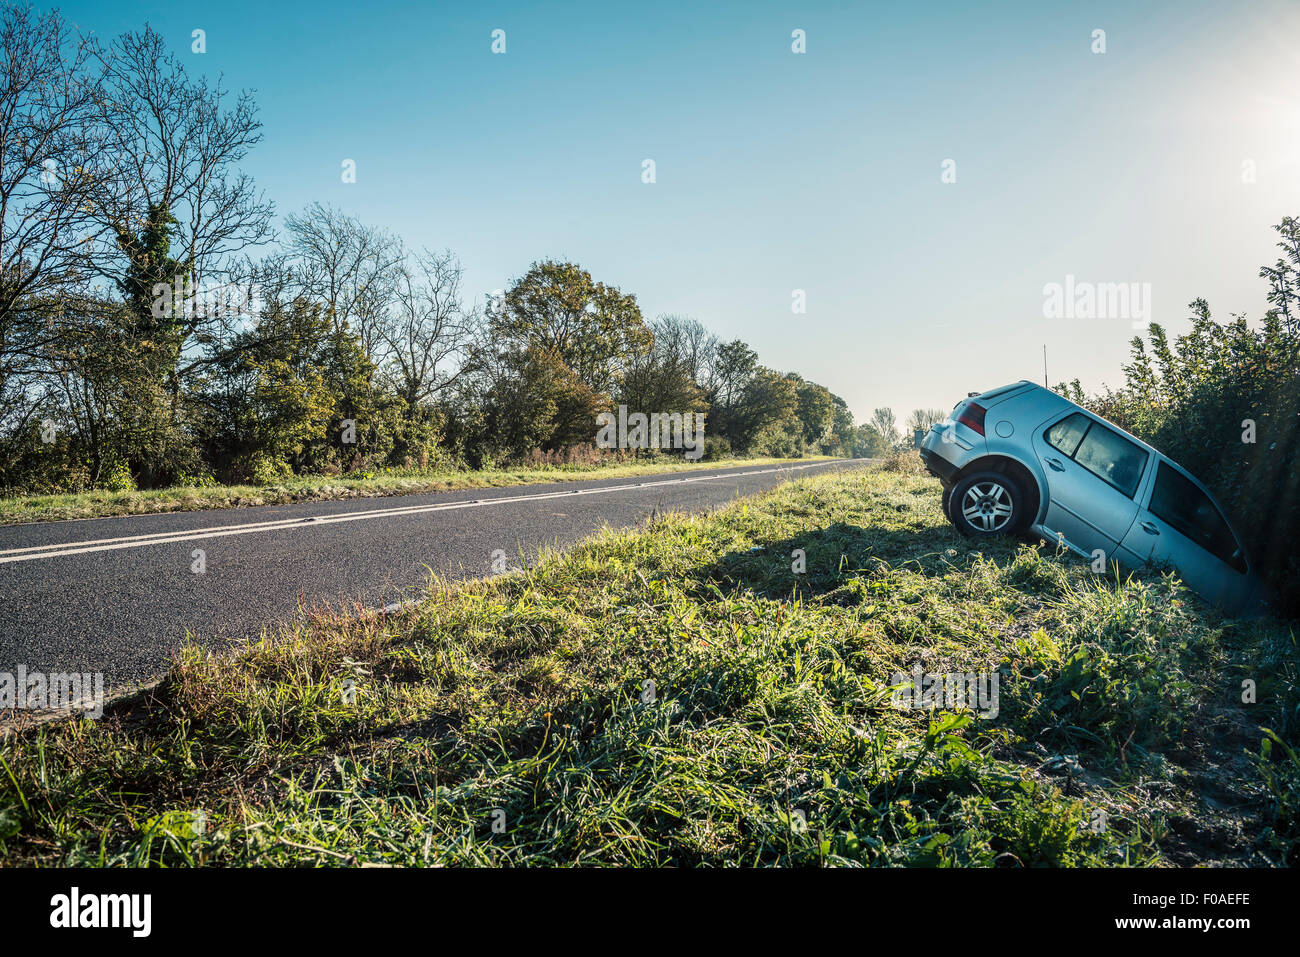 Car sticking out of hedge on rural highway roadside Stock Photo